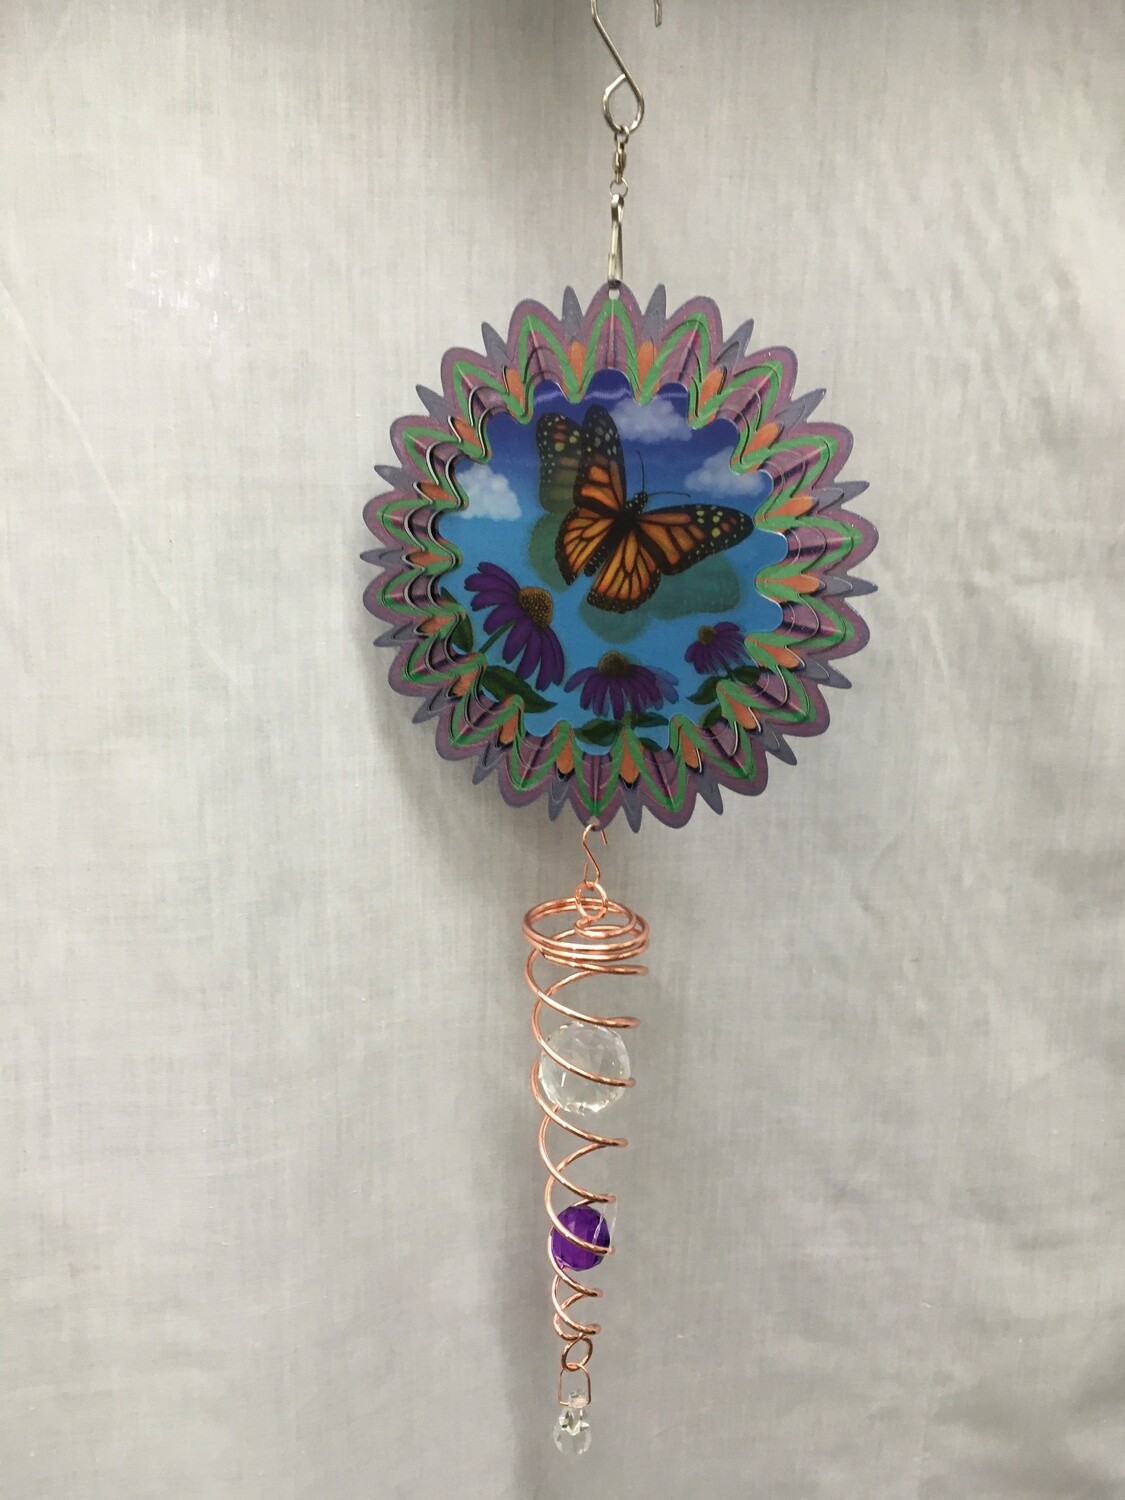 Spinner Set - Monarch Butterfly Small Animated Wind Spinner with Twister Spiral double crystal Tail